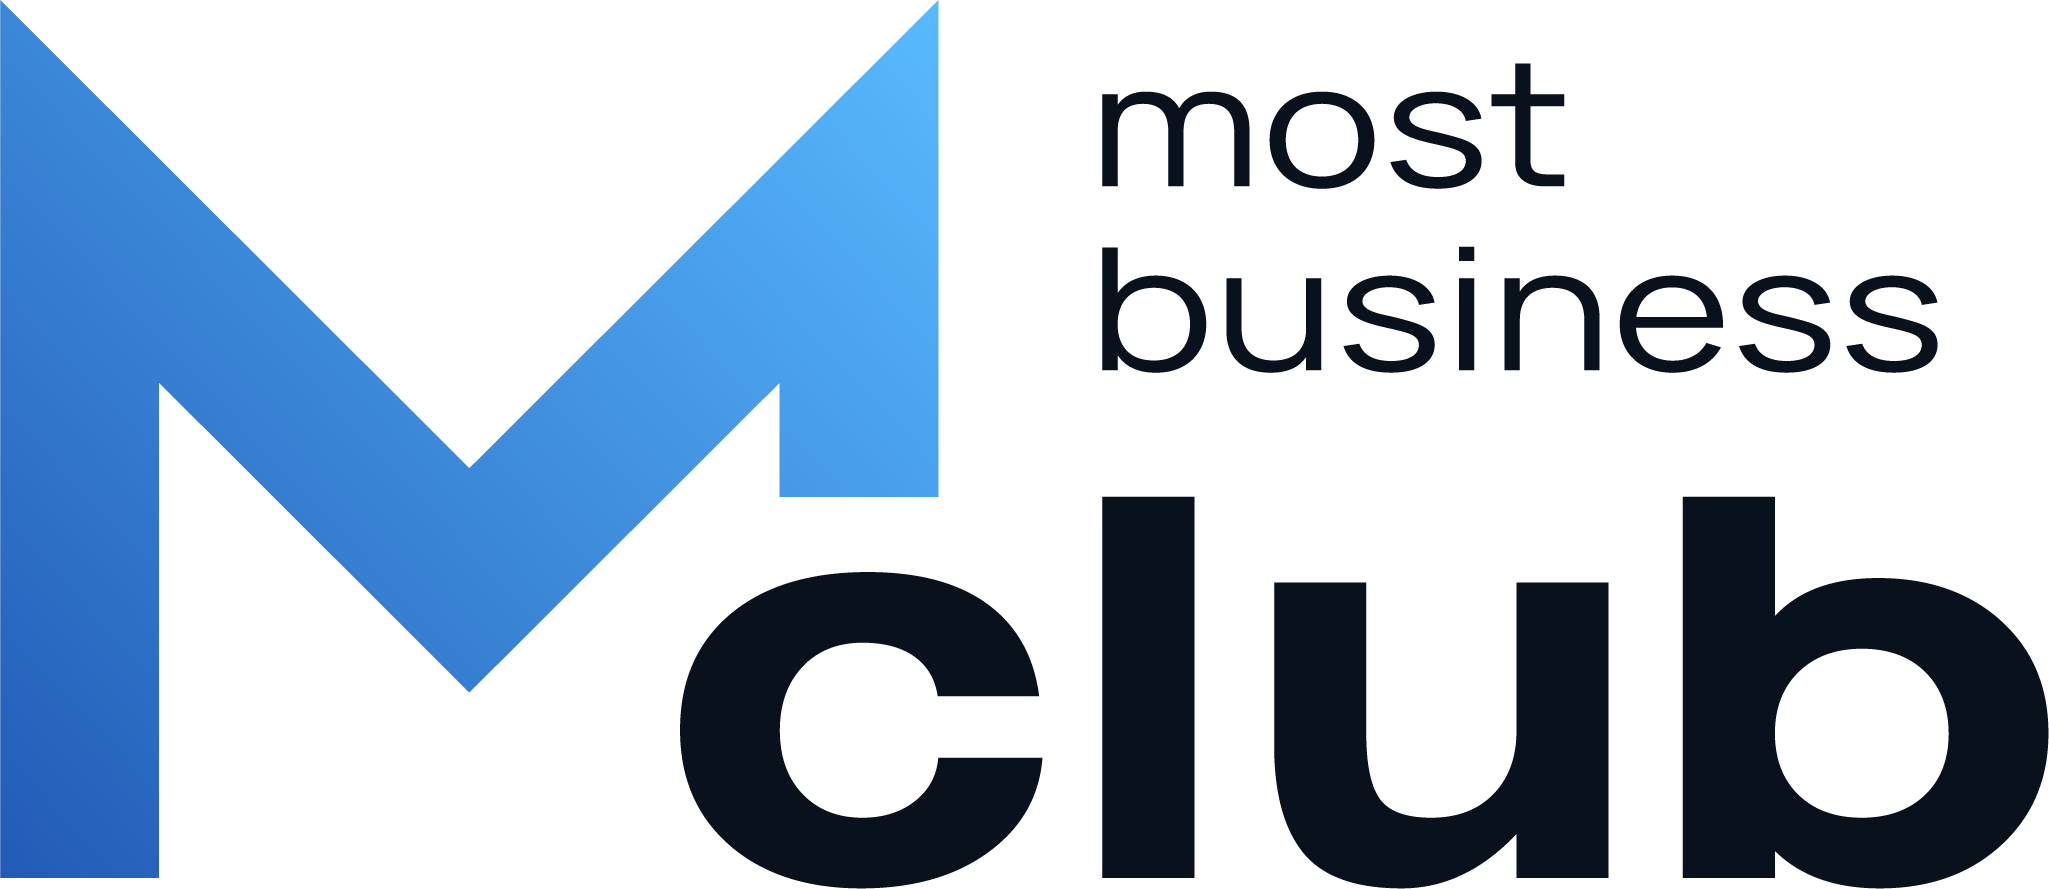 Most business club